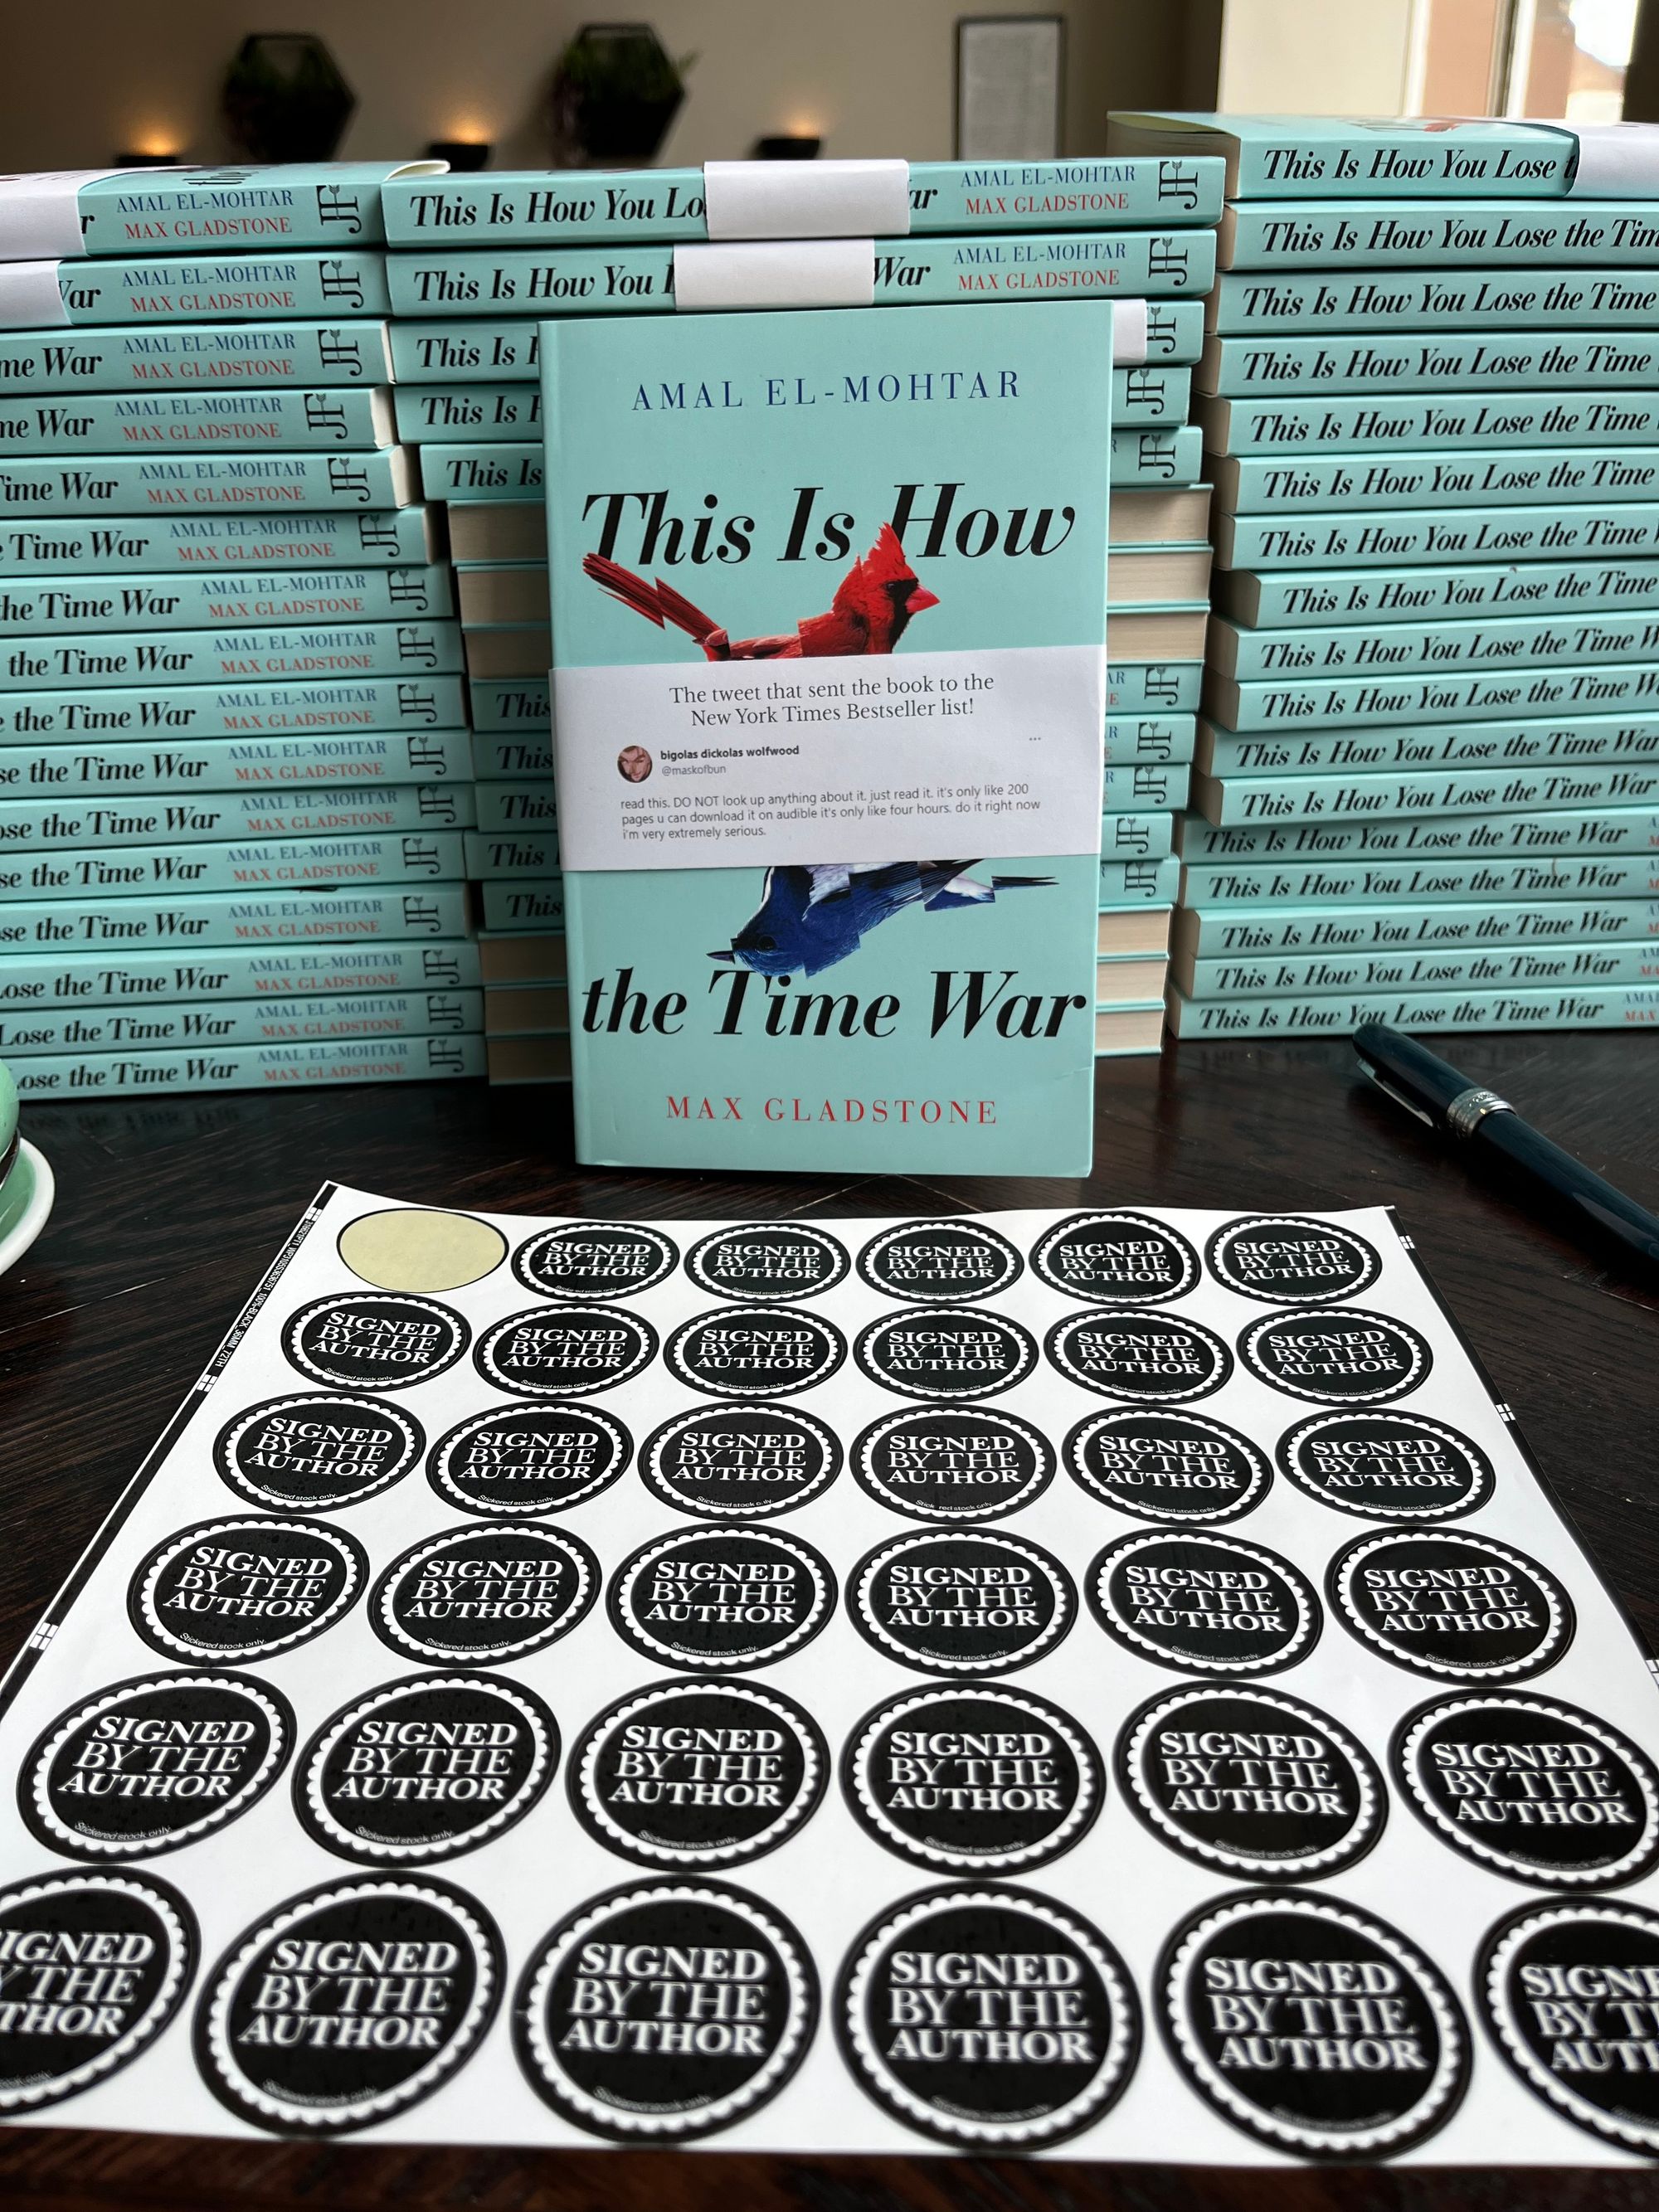 Roughly fifty paperback copies of This Is How You Lose the Time War arranged in three equal stacks on a table, with one copy faced out in front of them, displaying a printed sleeve of Bigolas Dickolas Wolfwood’s infamous tweet recommending the book. In the foreground is a sheet of Signed by the Author stickers to be put on the books once I’ve signed them.